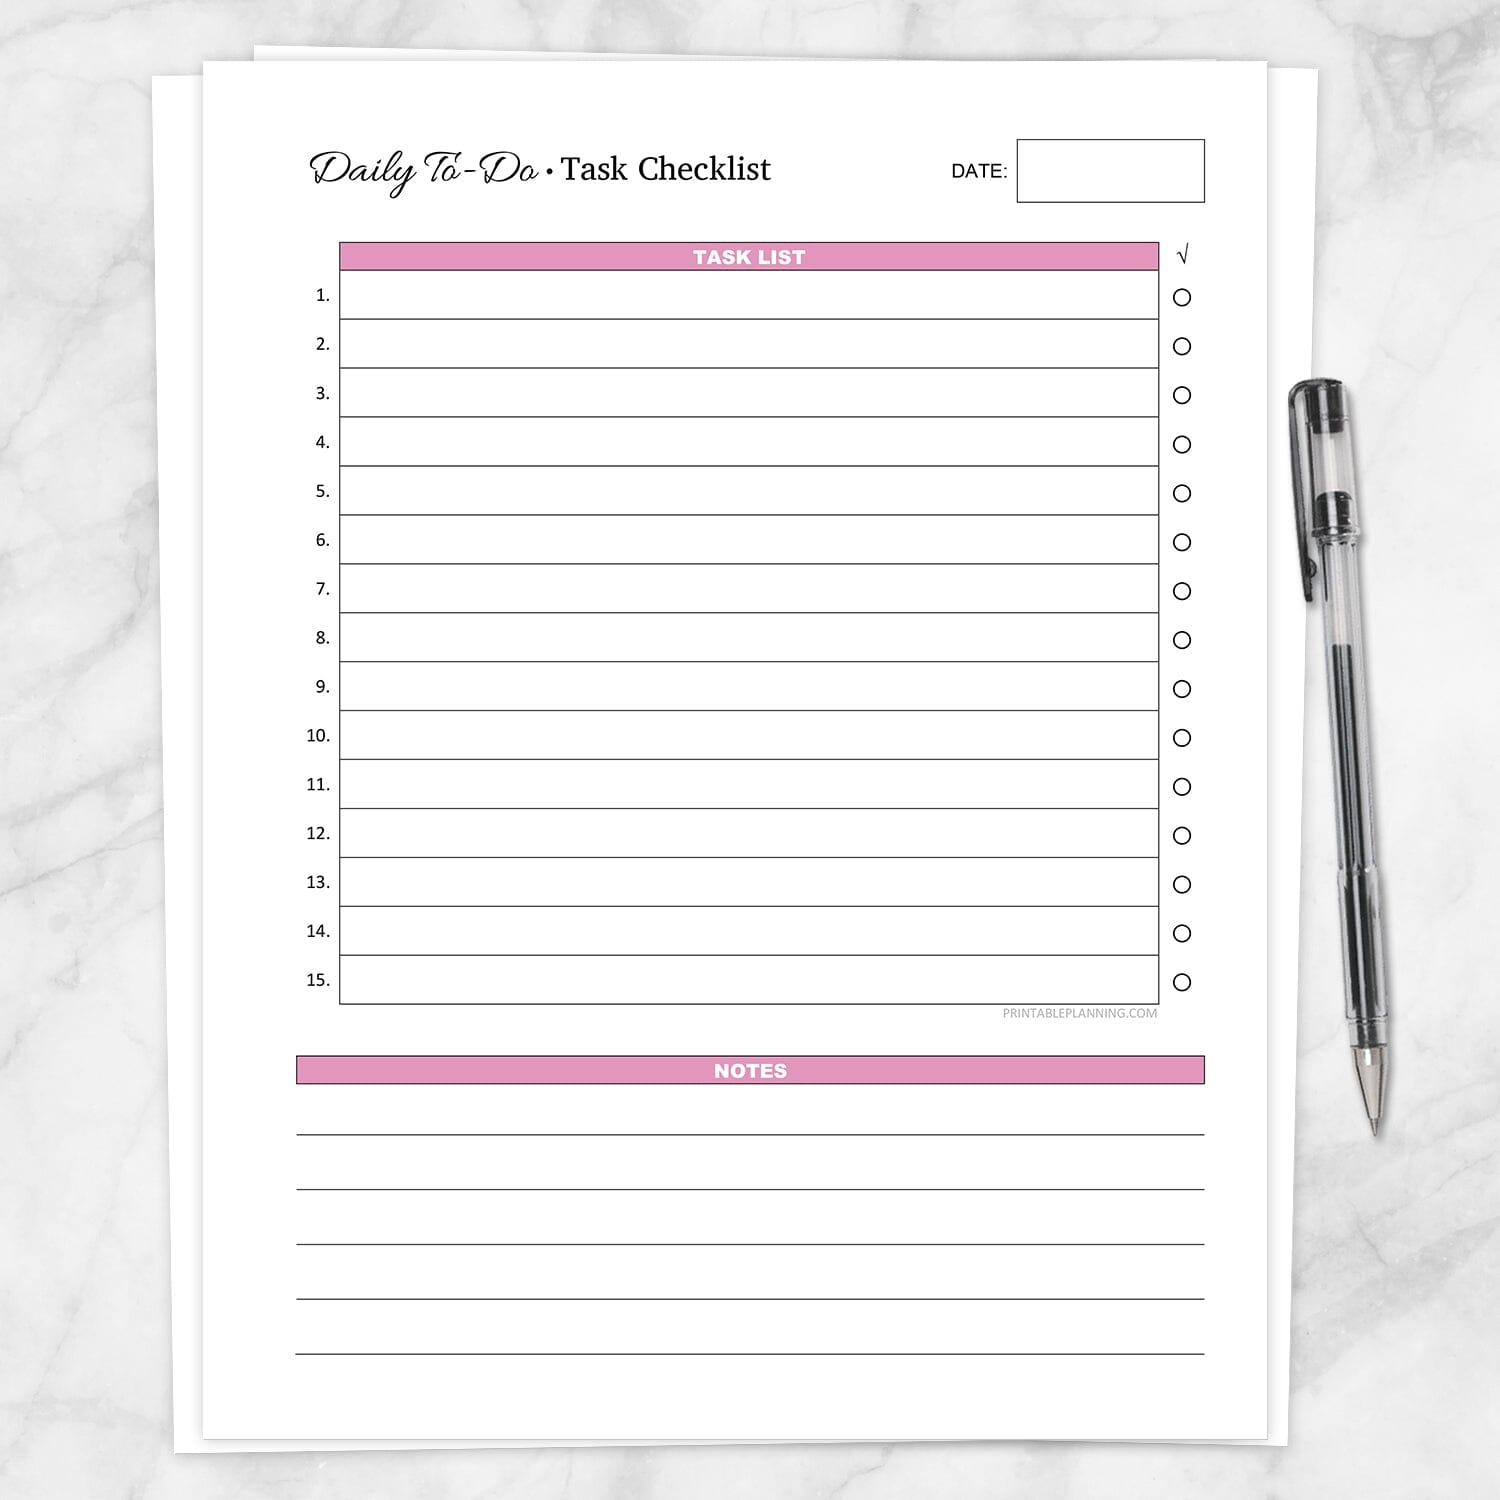 Printable Daily To-Do List - Task Checklist in Pink at Printable Planning.